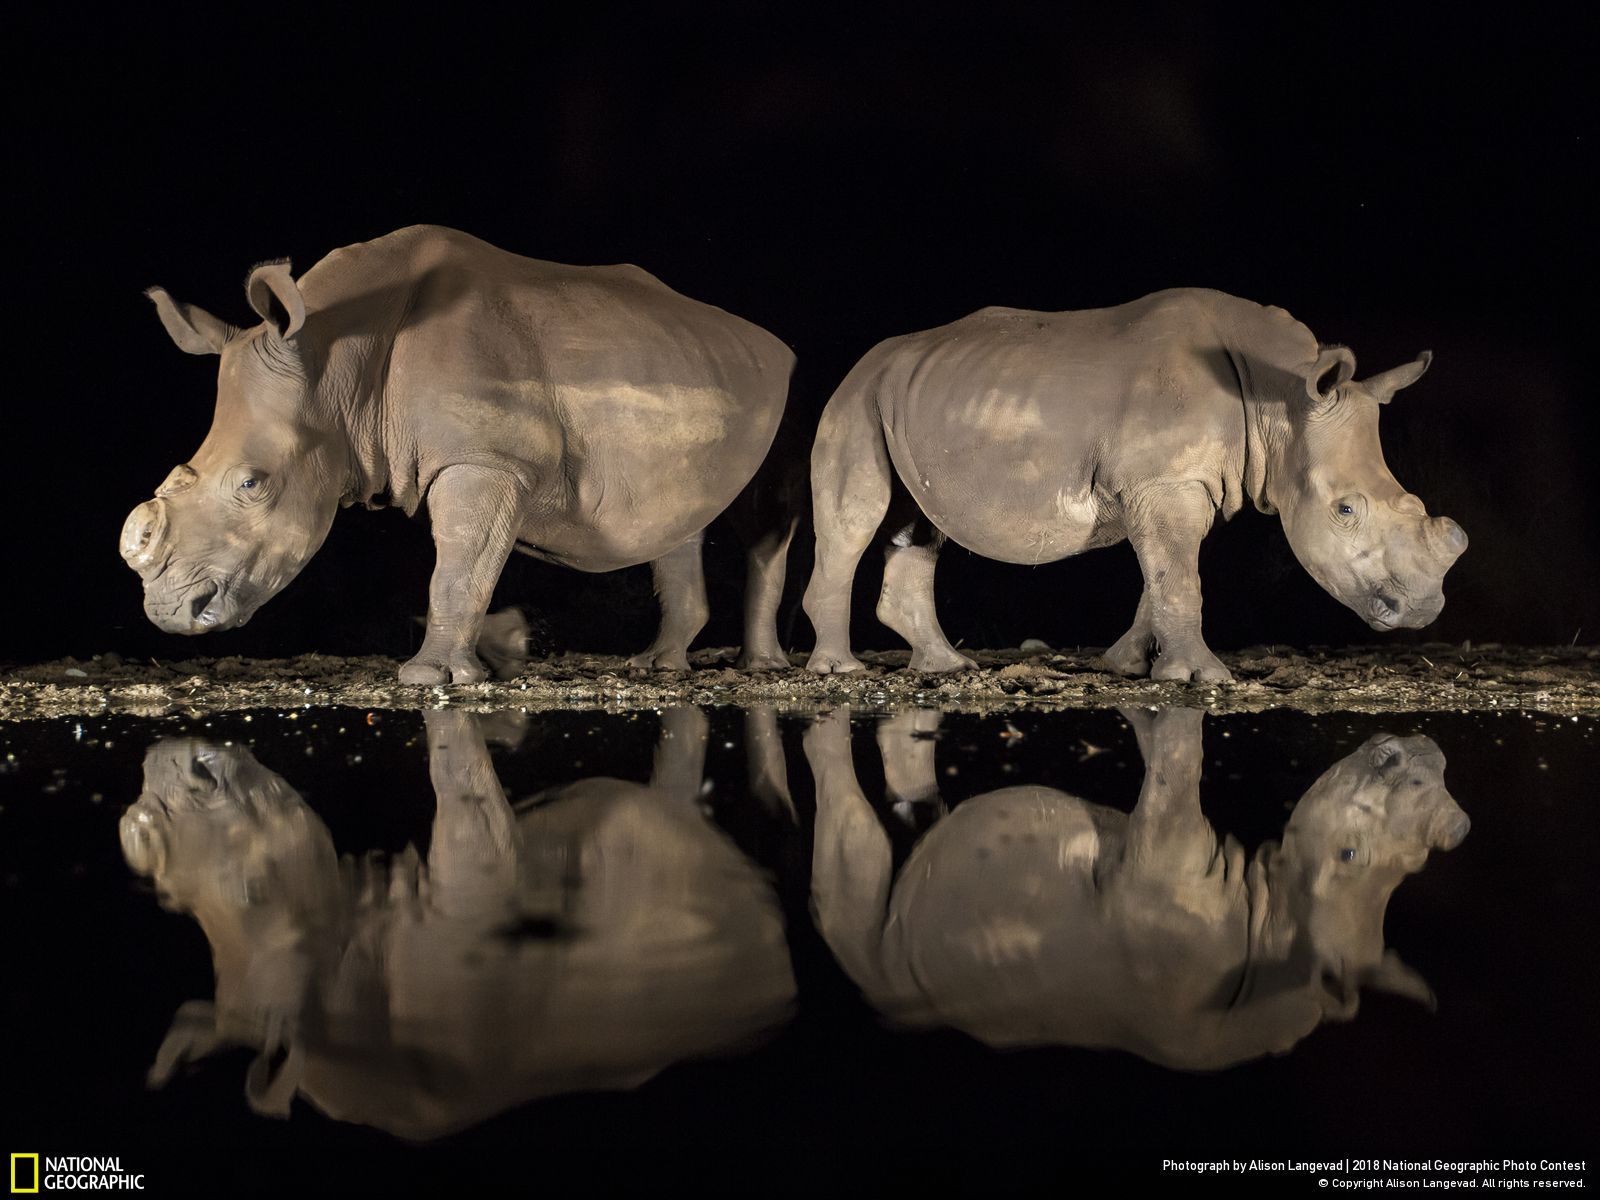 A New Look, © Alison Langevad, Third Place, Wildlife, National Geographic Photo Contest